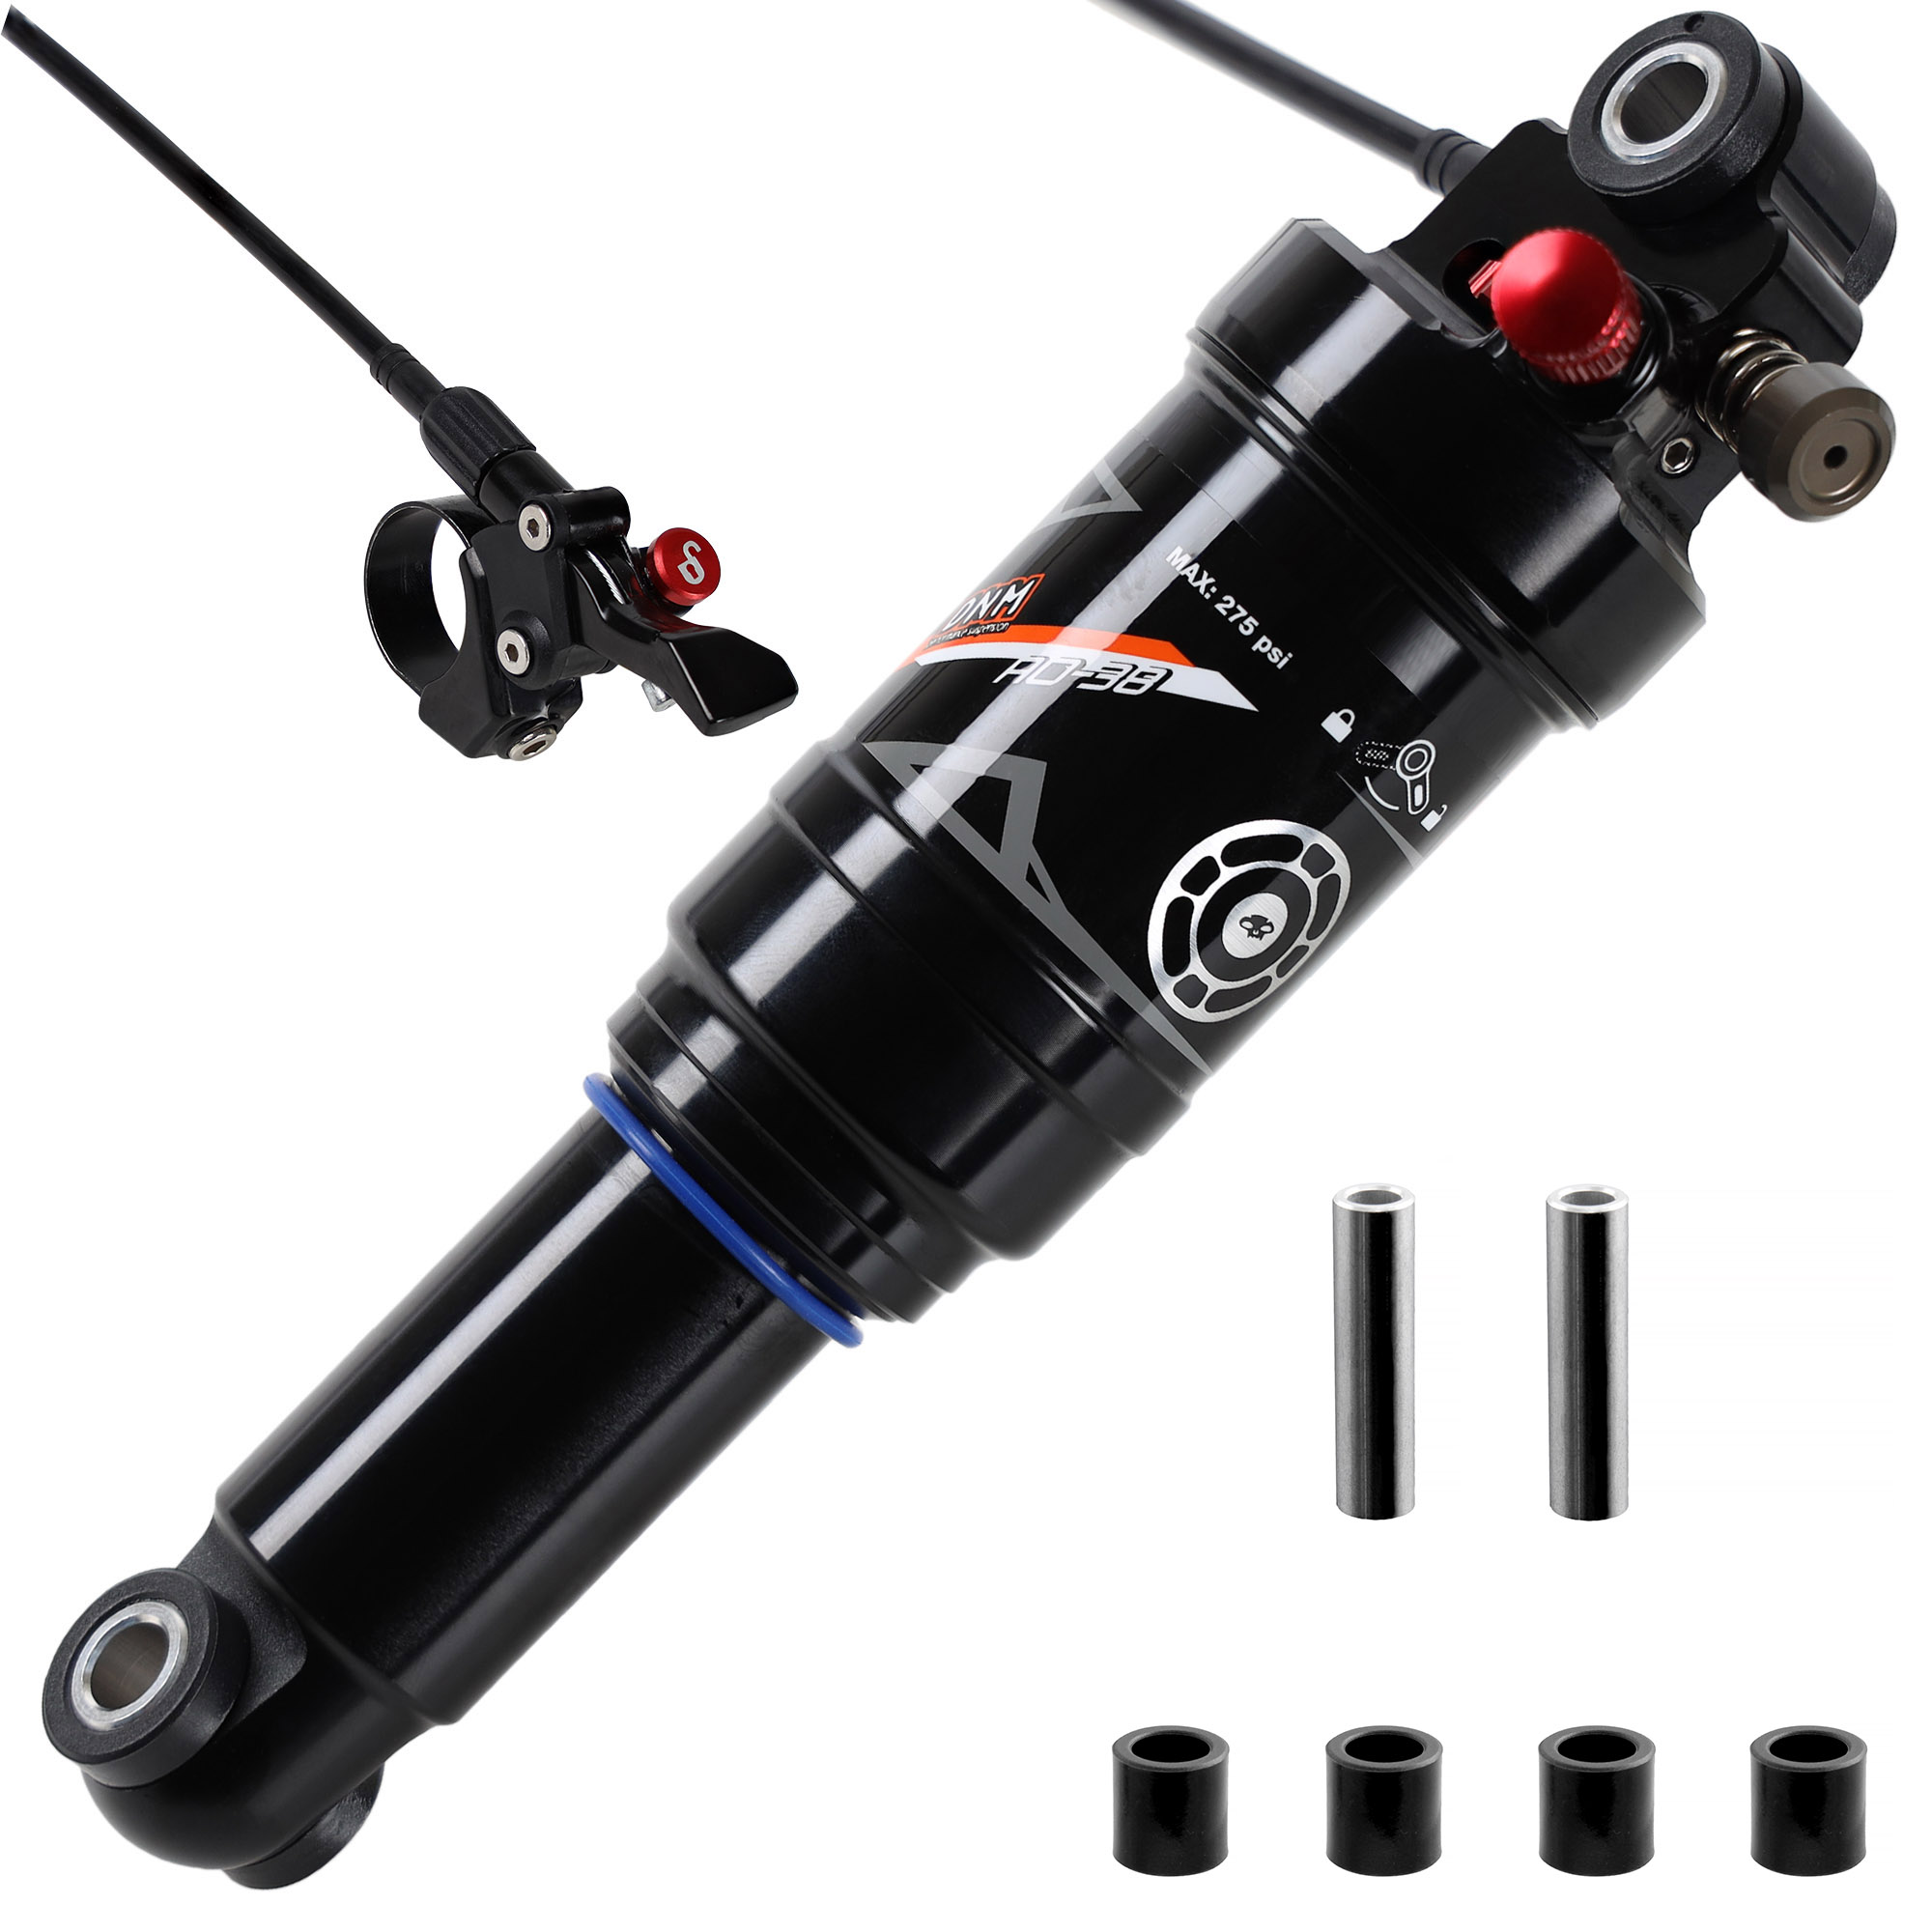 DNM AO-38RL Mountain Bike Air Rear Shock With Remote Lockout 200mm Travel 53mm